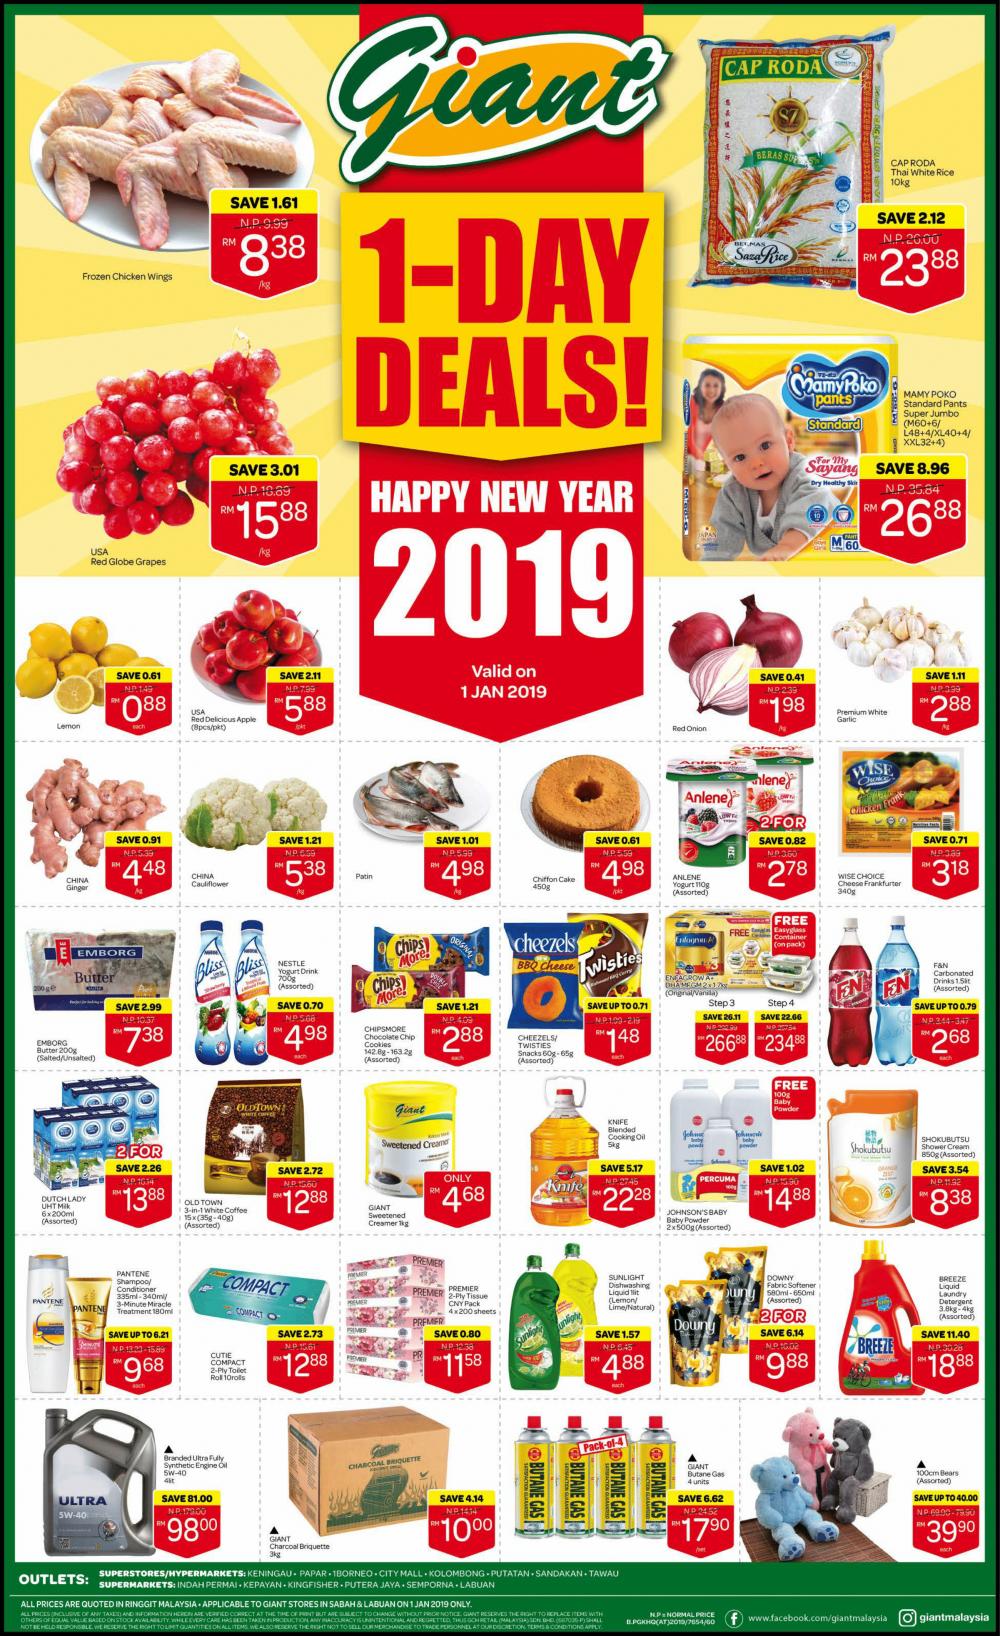 Giant New Year 1 Day Deals Promotion at Sabah and Labuan (1 January 2019)